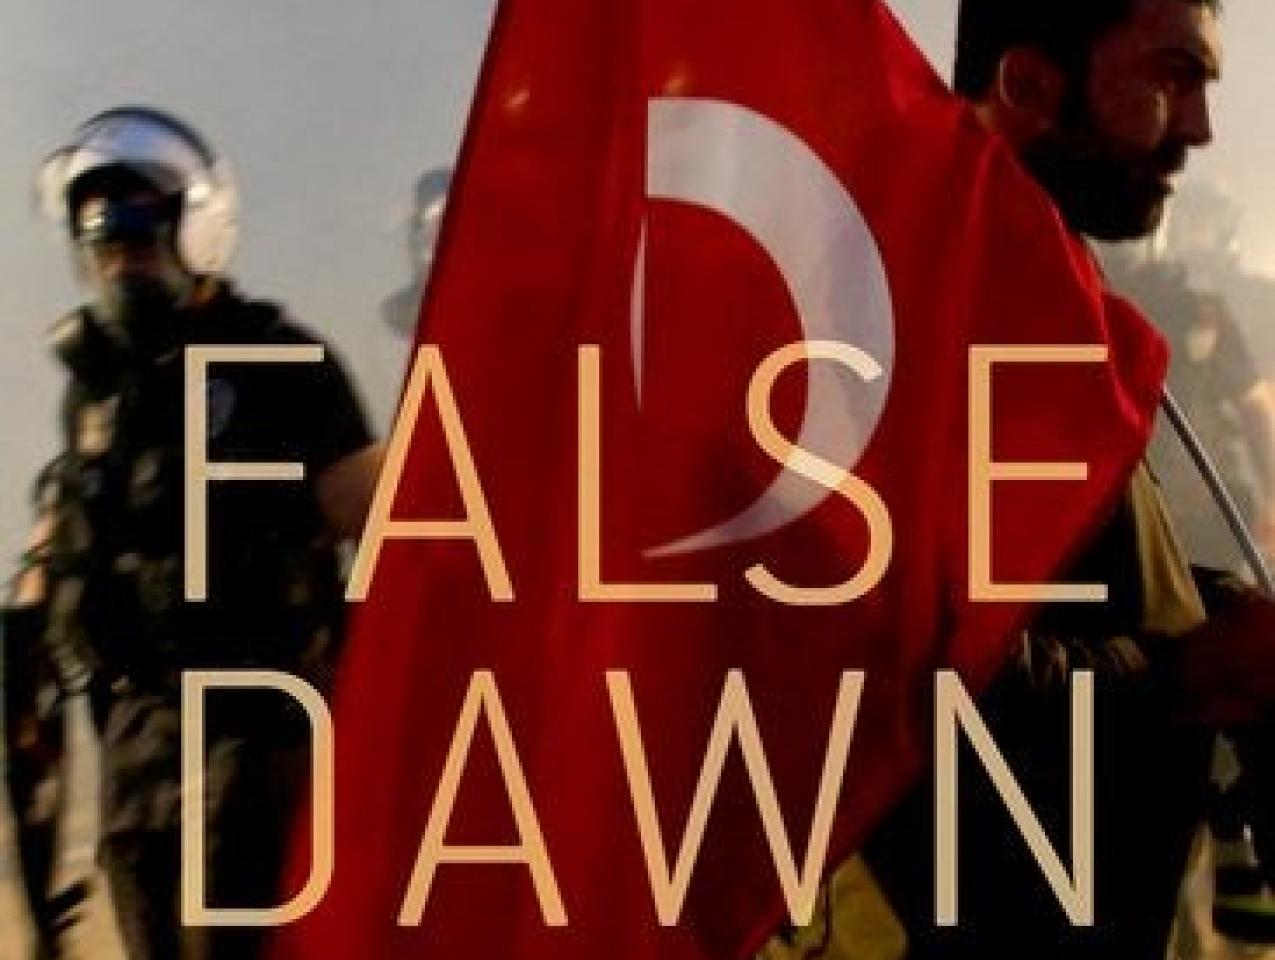 Image for False Dawn: Protest, Democracy, And Violence In The New Middle East